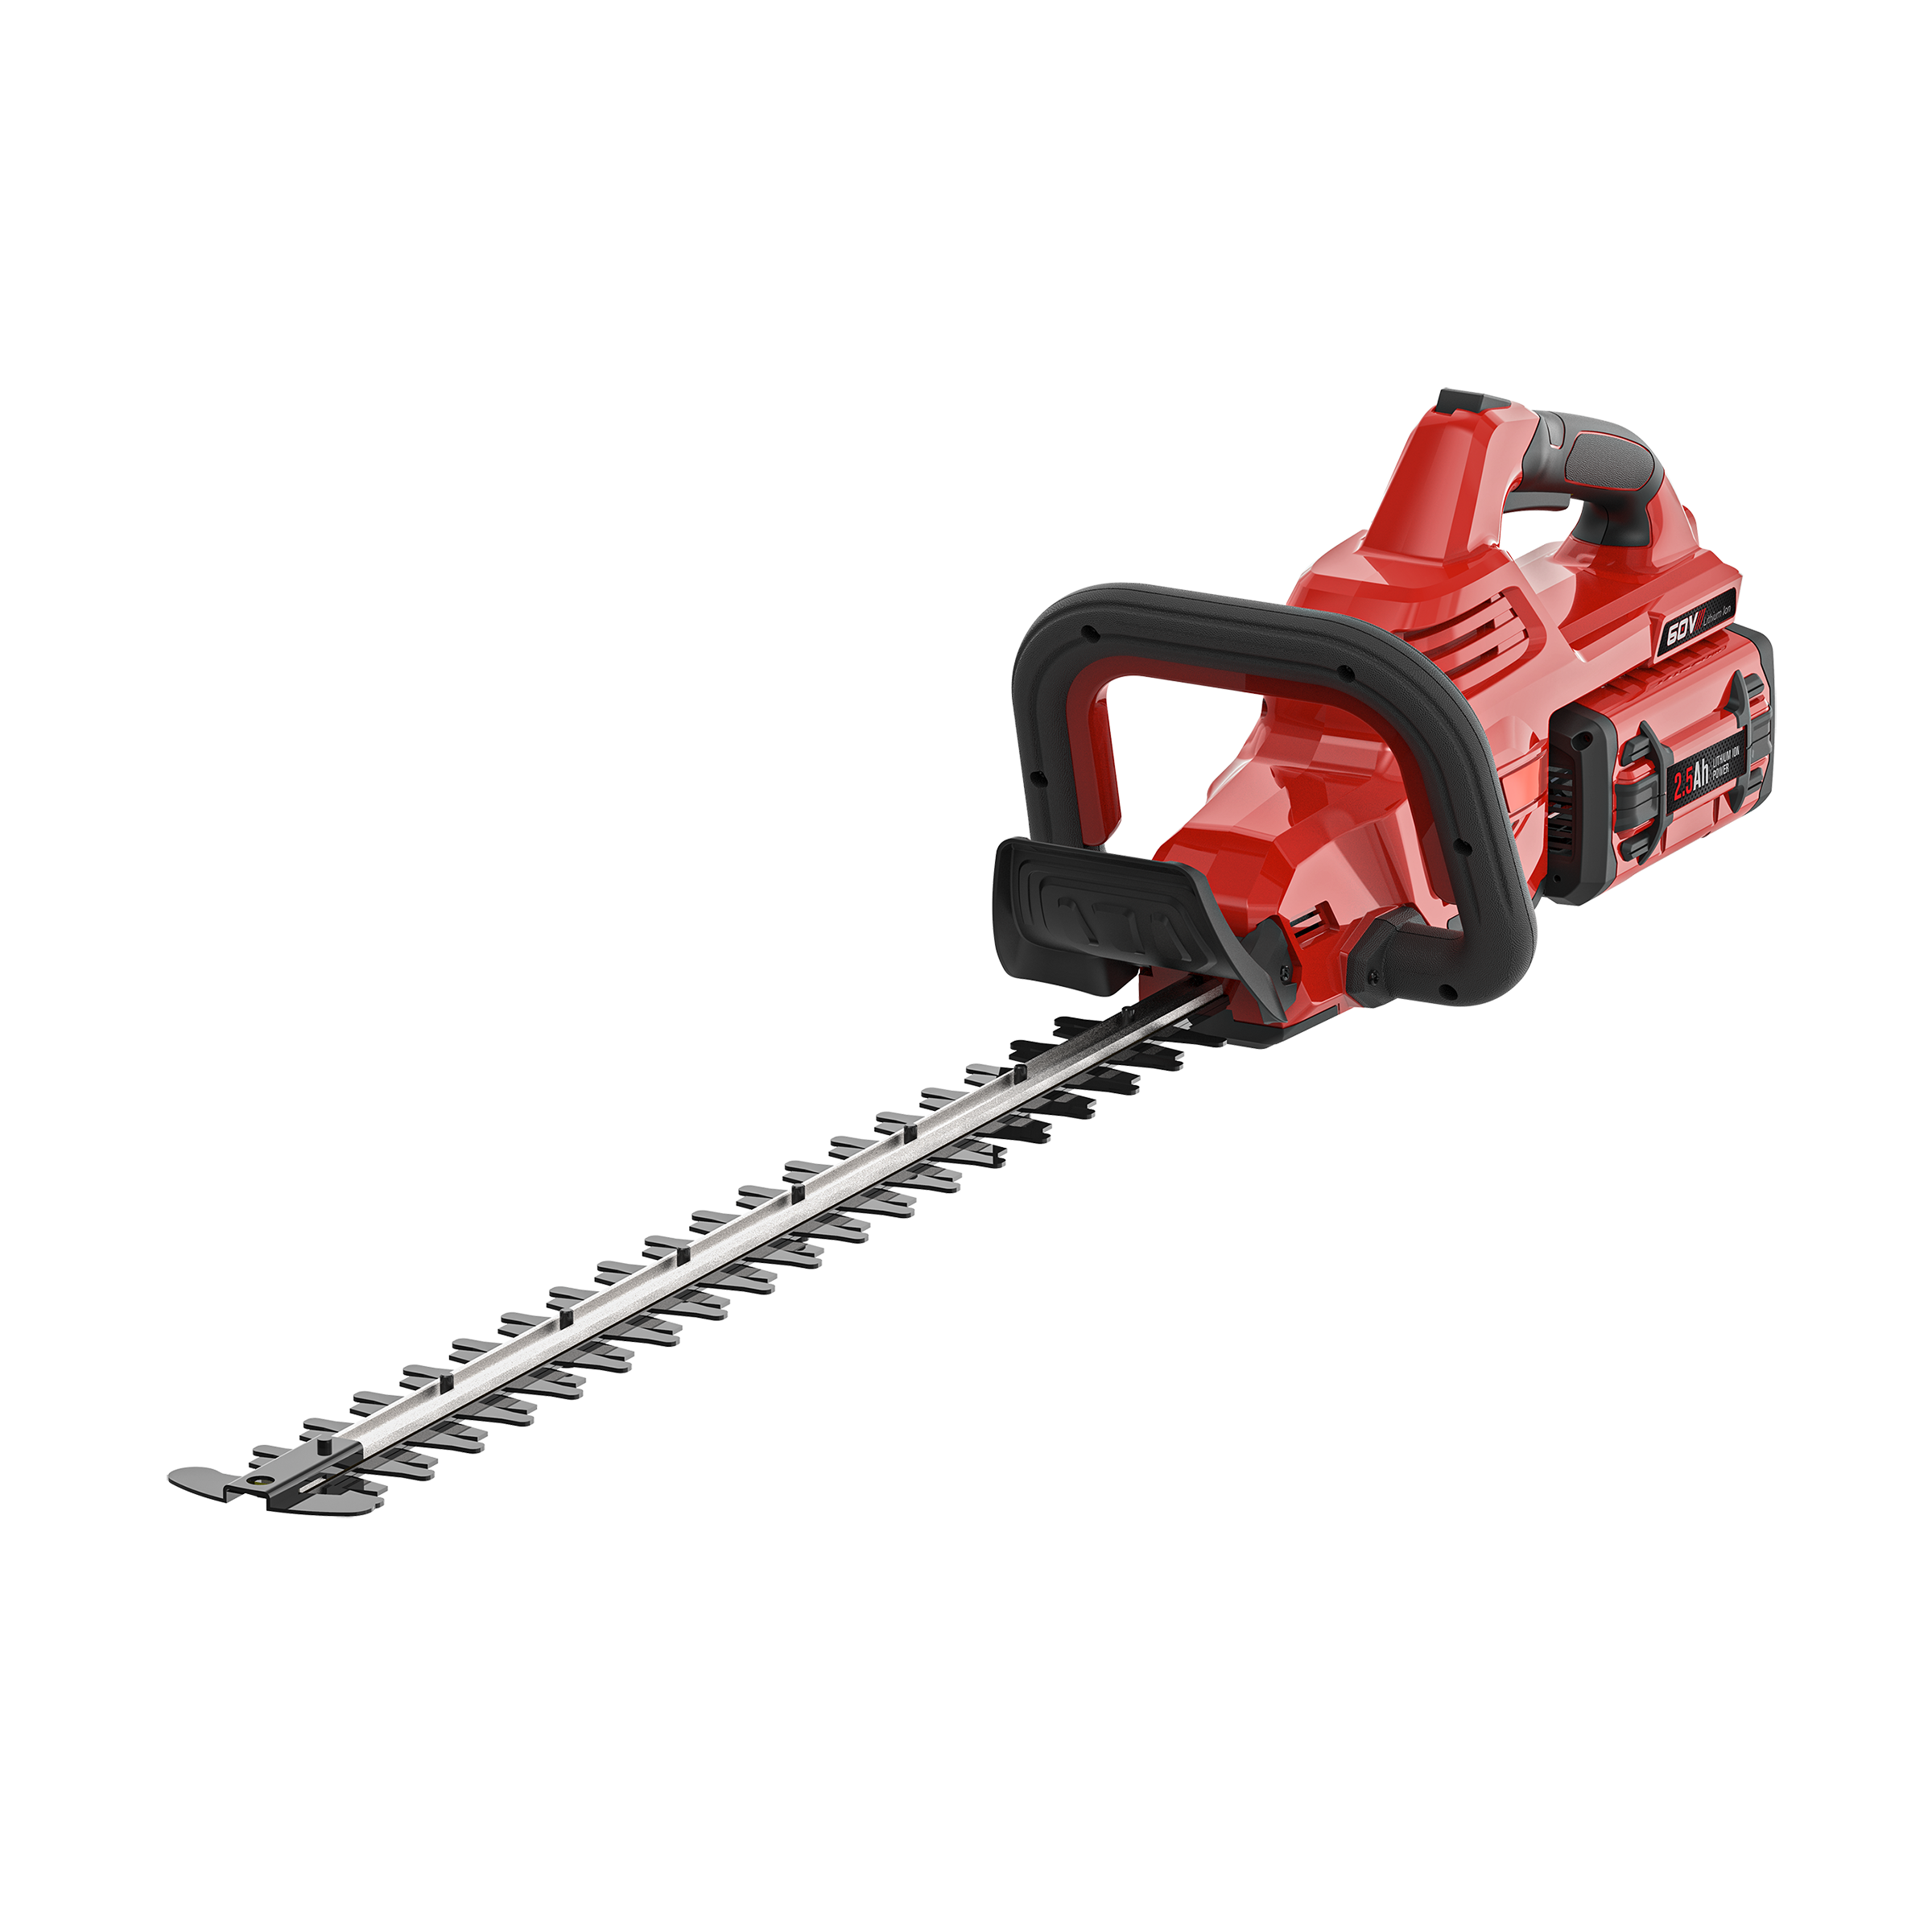 prorun-hedge-trimmers-at-lowes